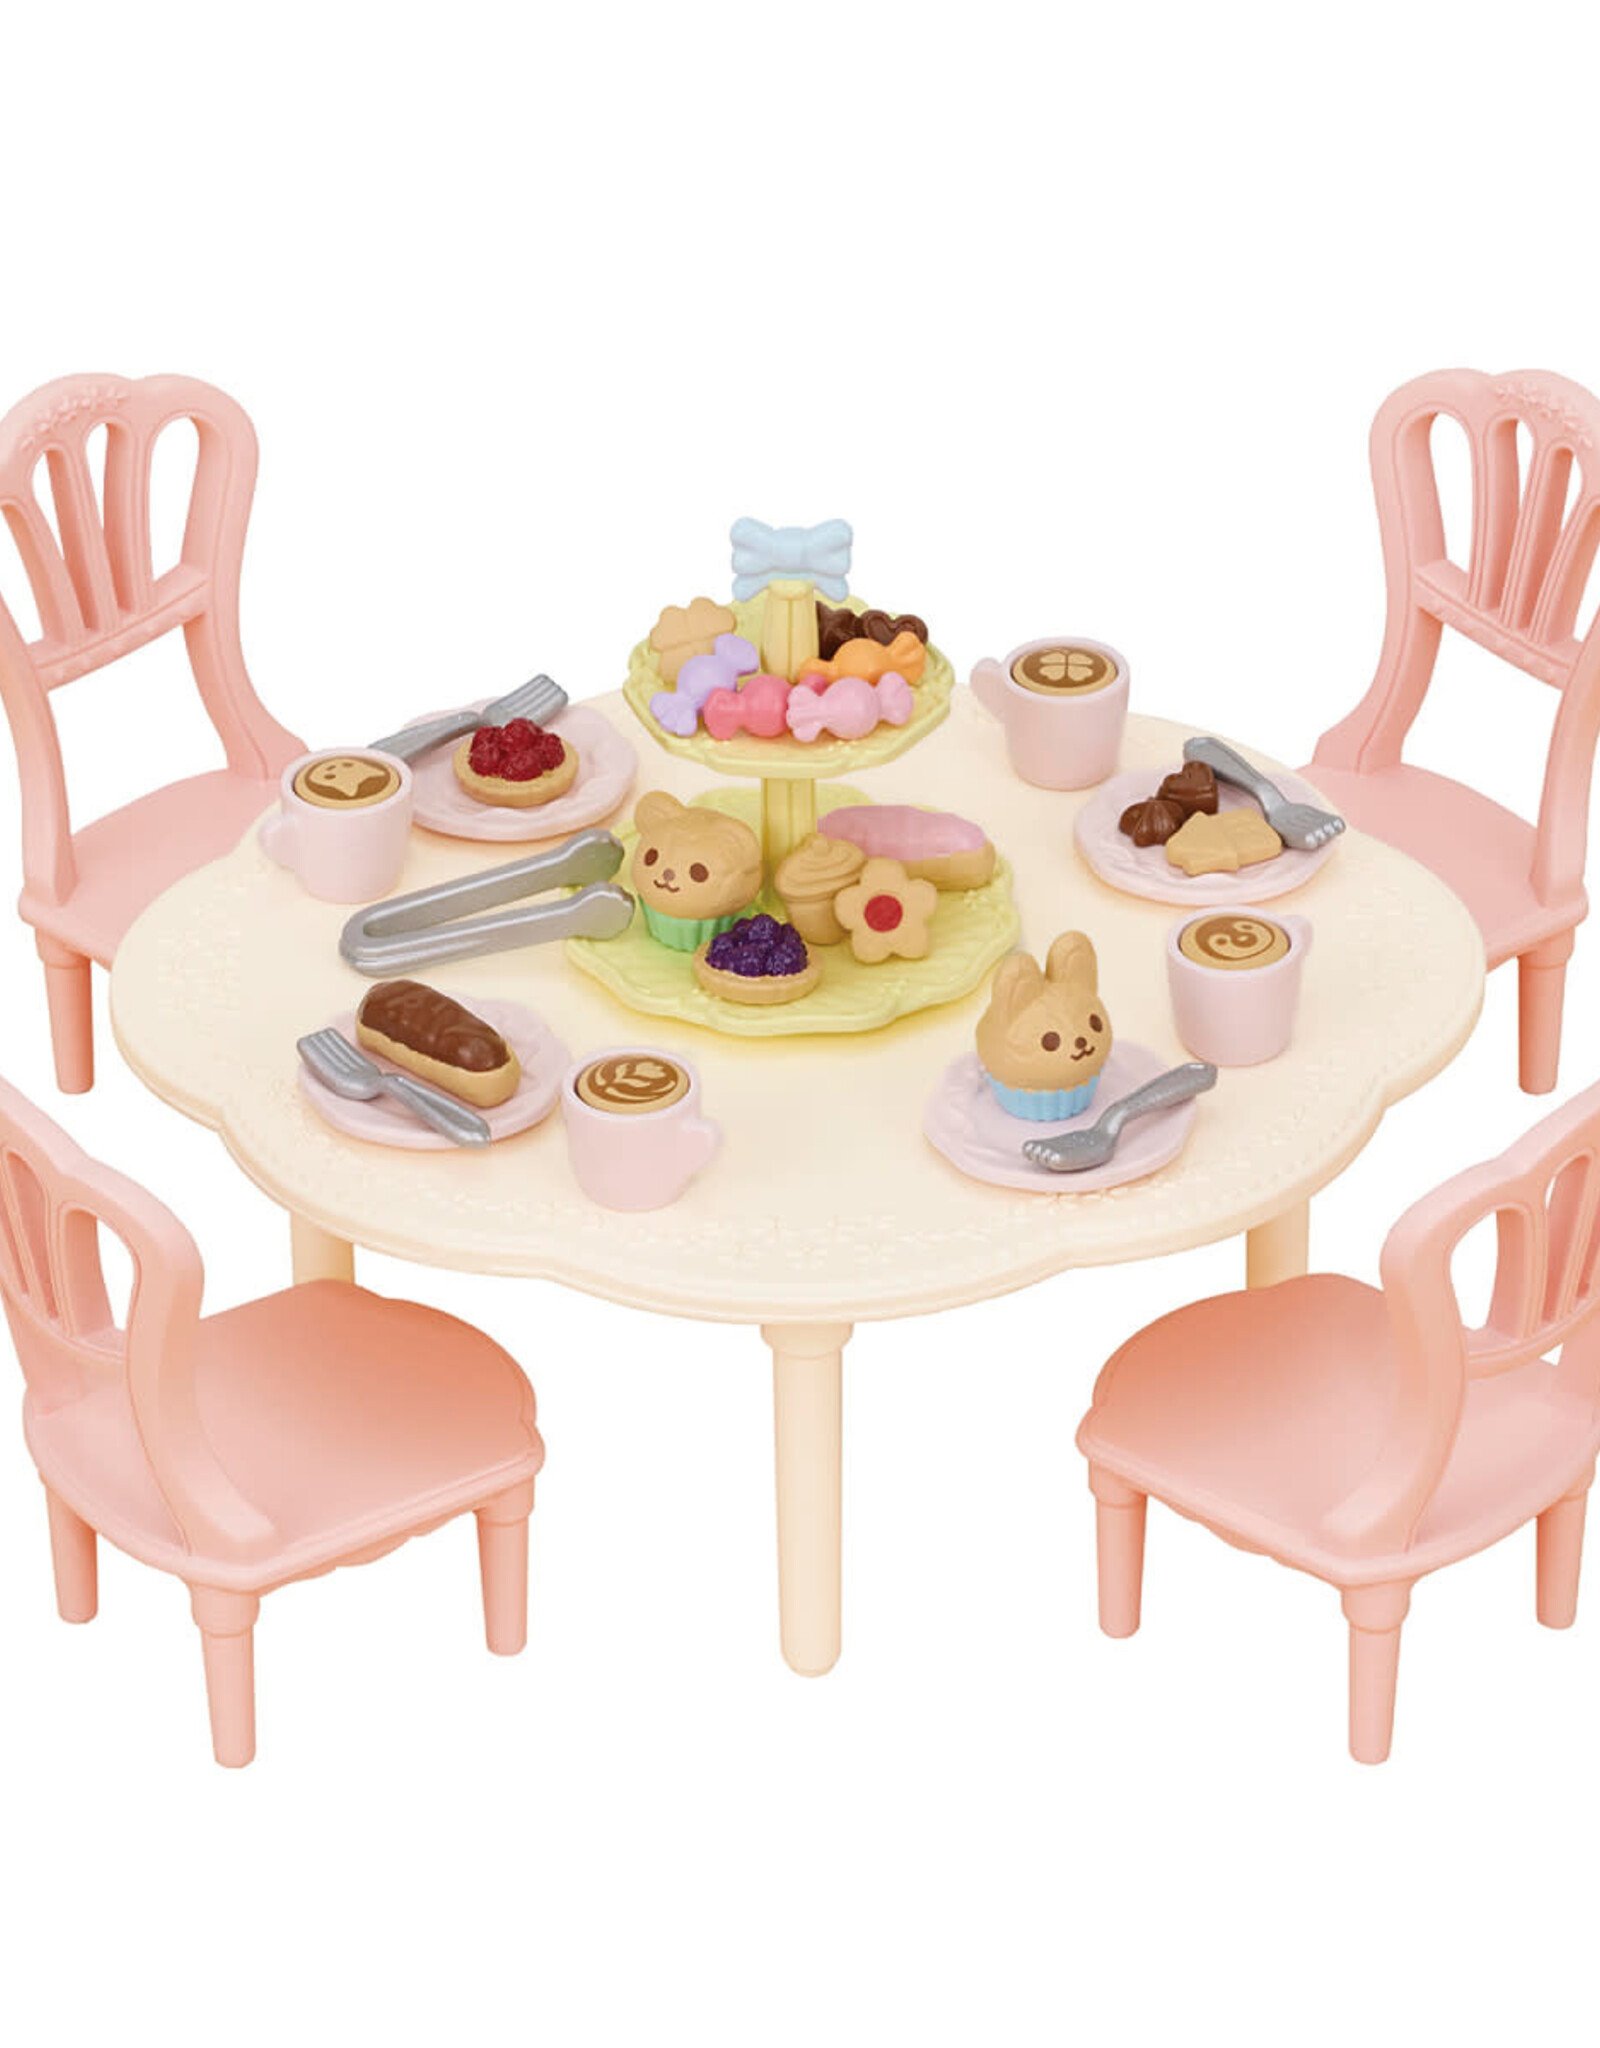 Epoch Everlasting Play Sweets Party Set